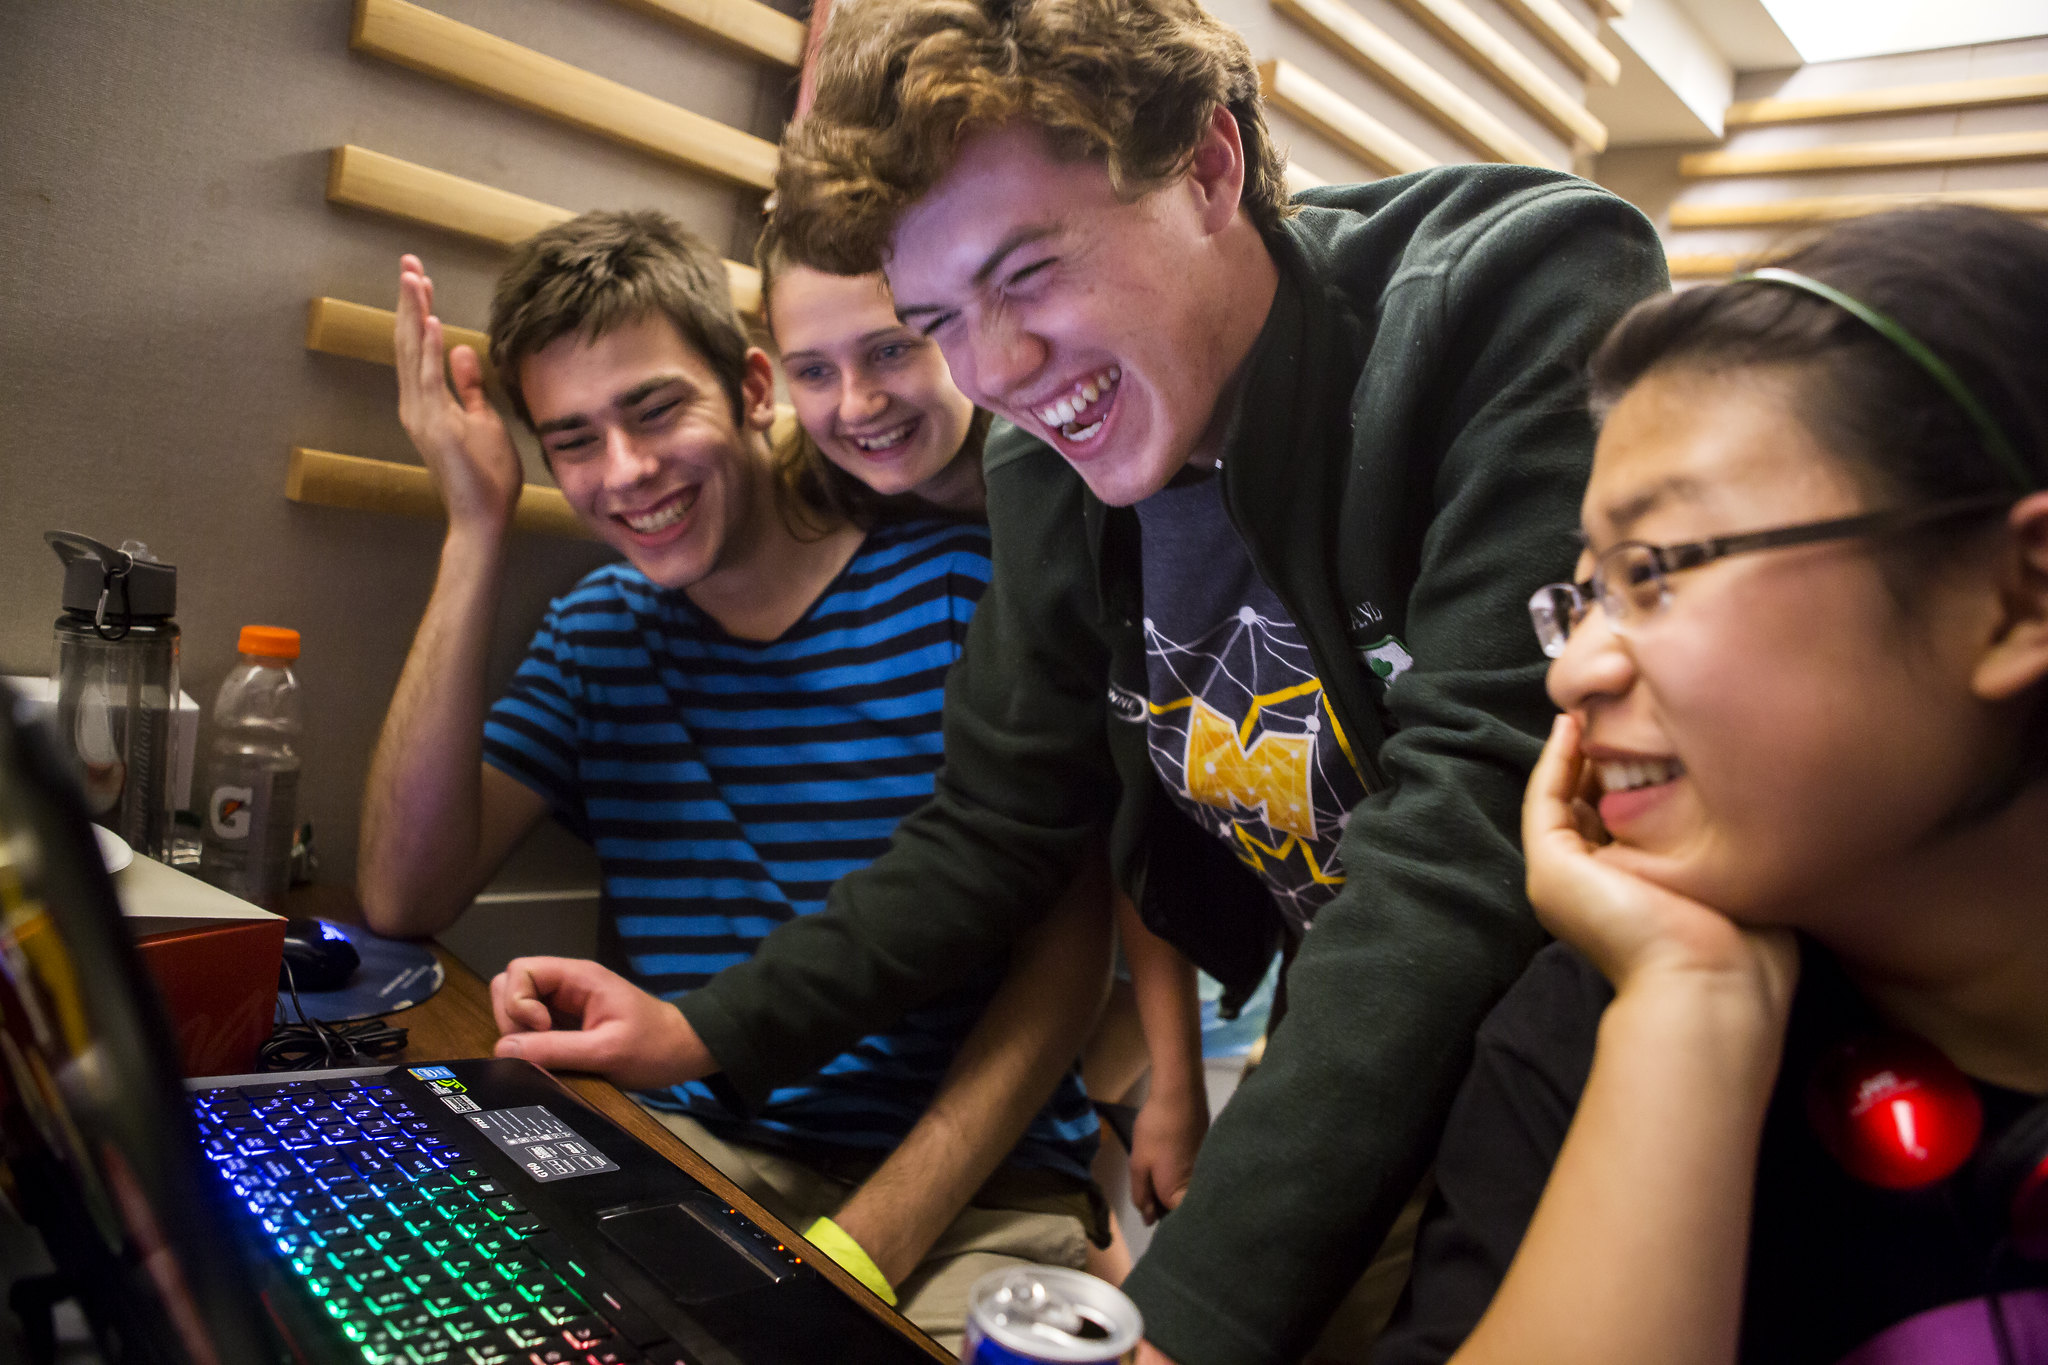 Four students crowded around a computer smiling, laughing, and generally celebrating